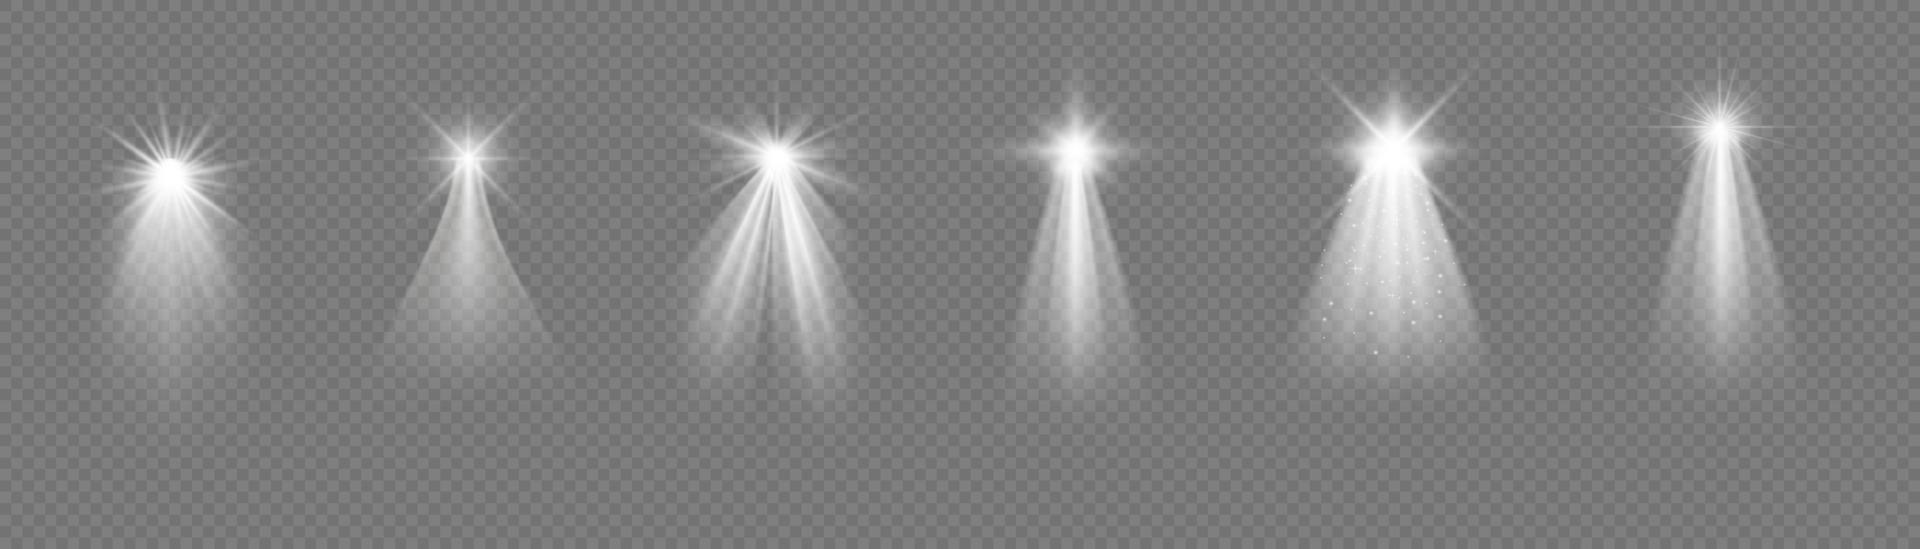 Christmas star with spotlight. Light effect white color. Glowing isolated white sparkling light effect. Spark spotlight special effect design. Ray vector element.